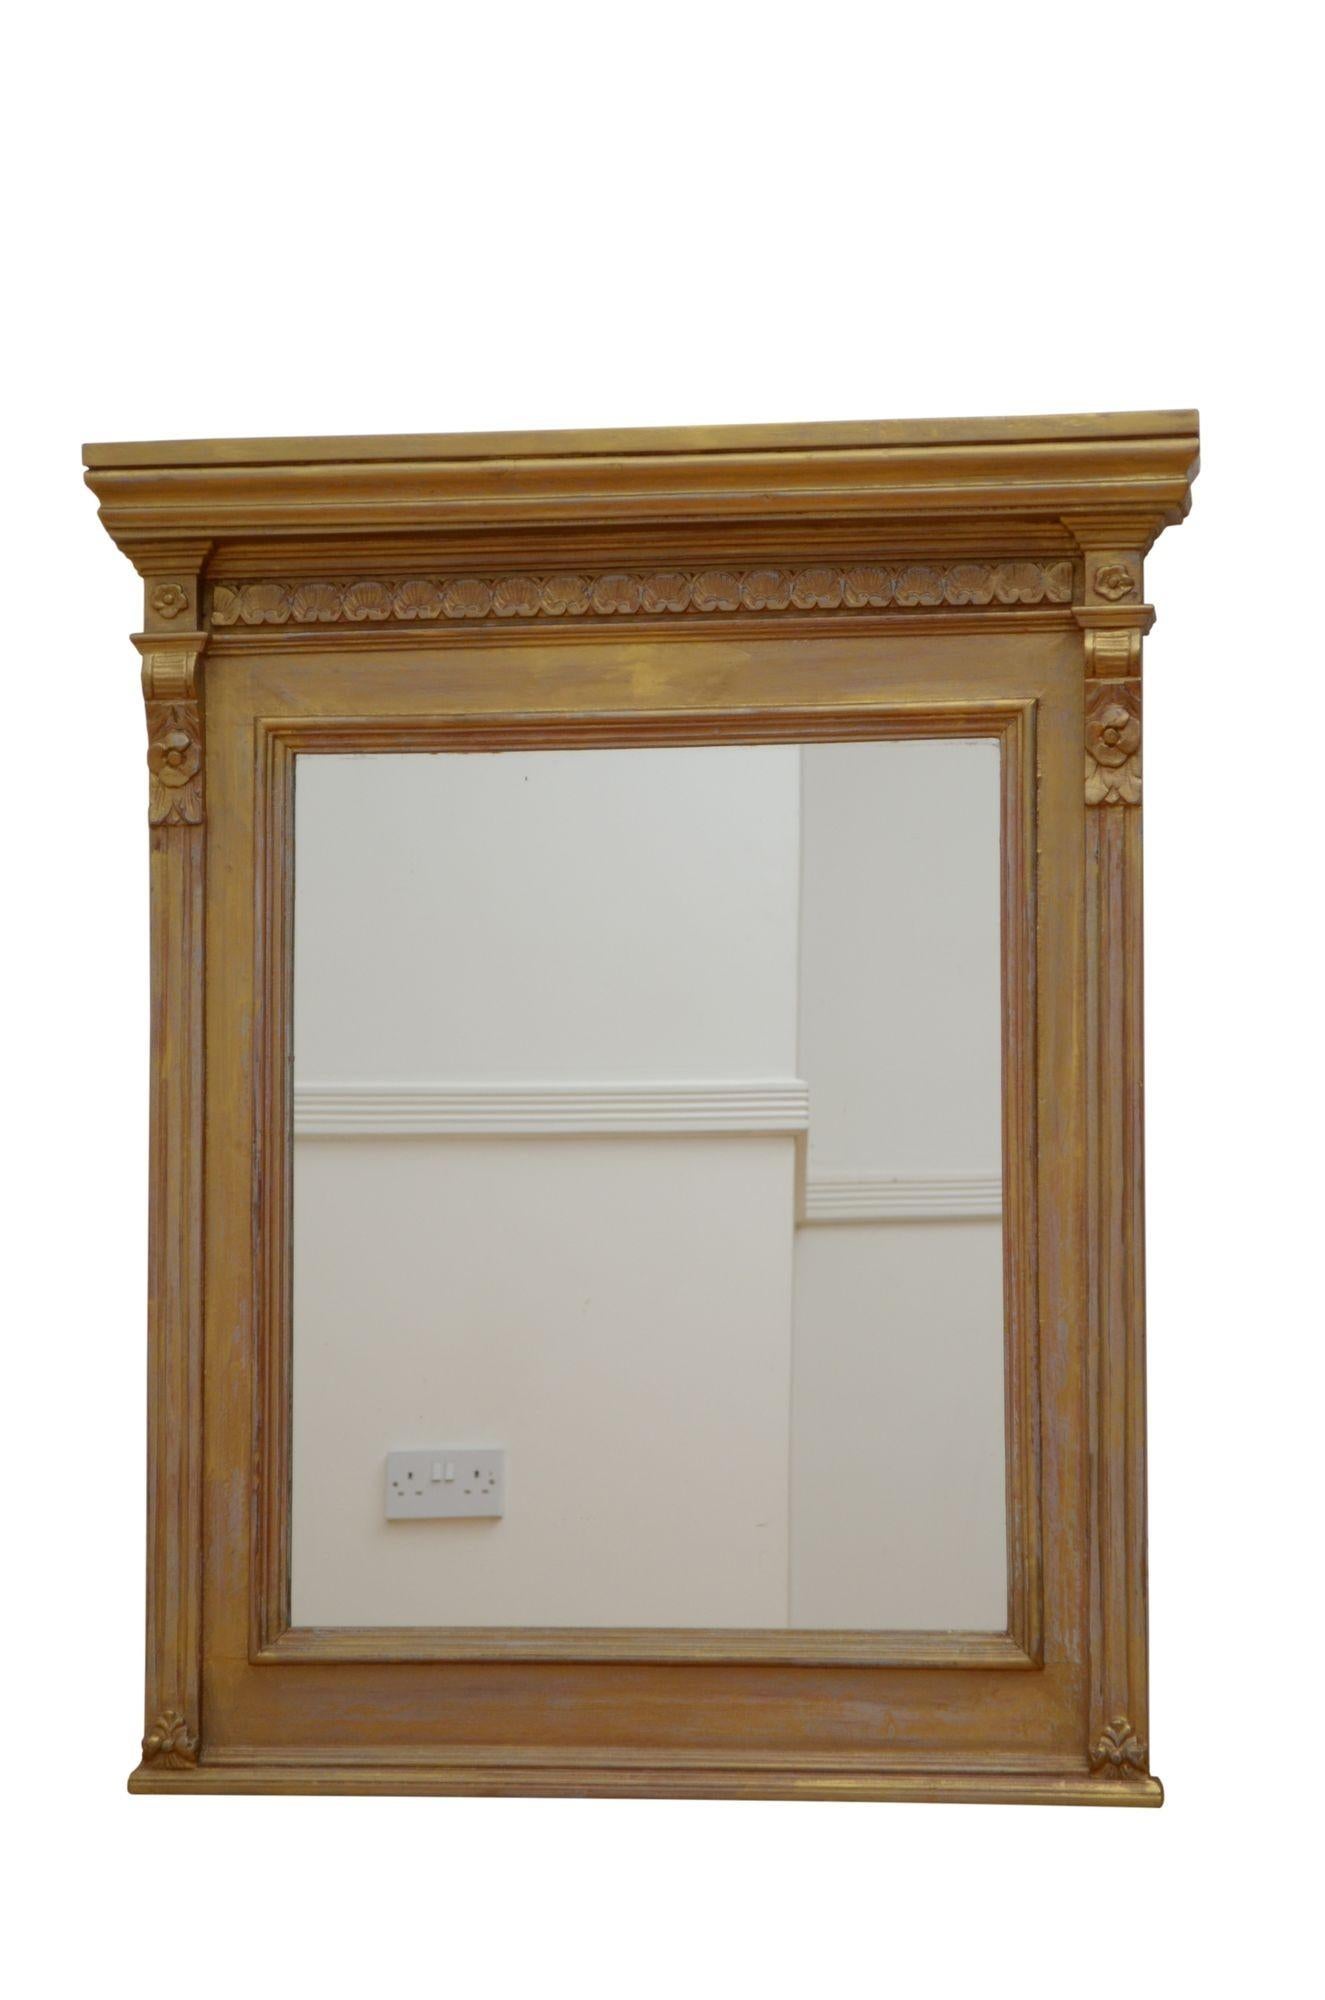 K0620 Elegant Edwardian wall mirror, having cavetto cornice above carved frieze and oblong glass, (possibly a replacement) flanked by reeded pilasters with drop carvings. This antique mirror has been refinished in the past and it is in home ready